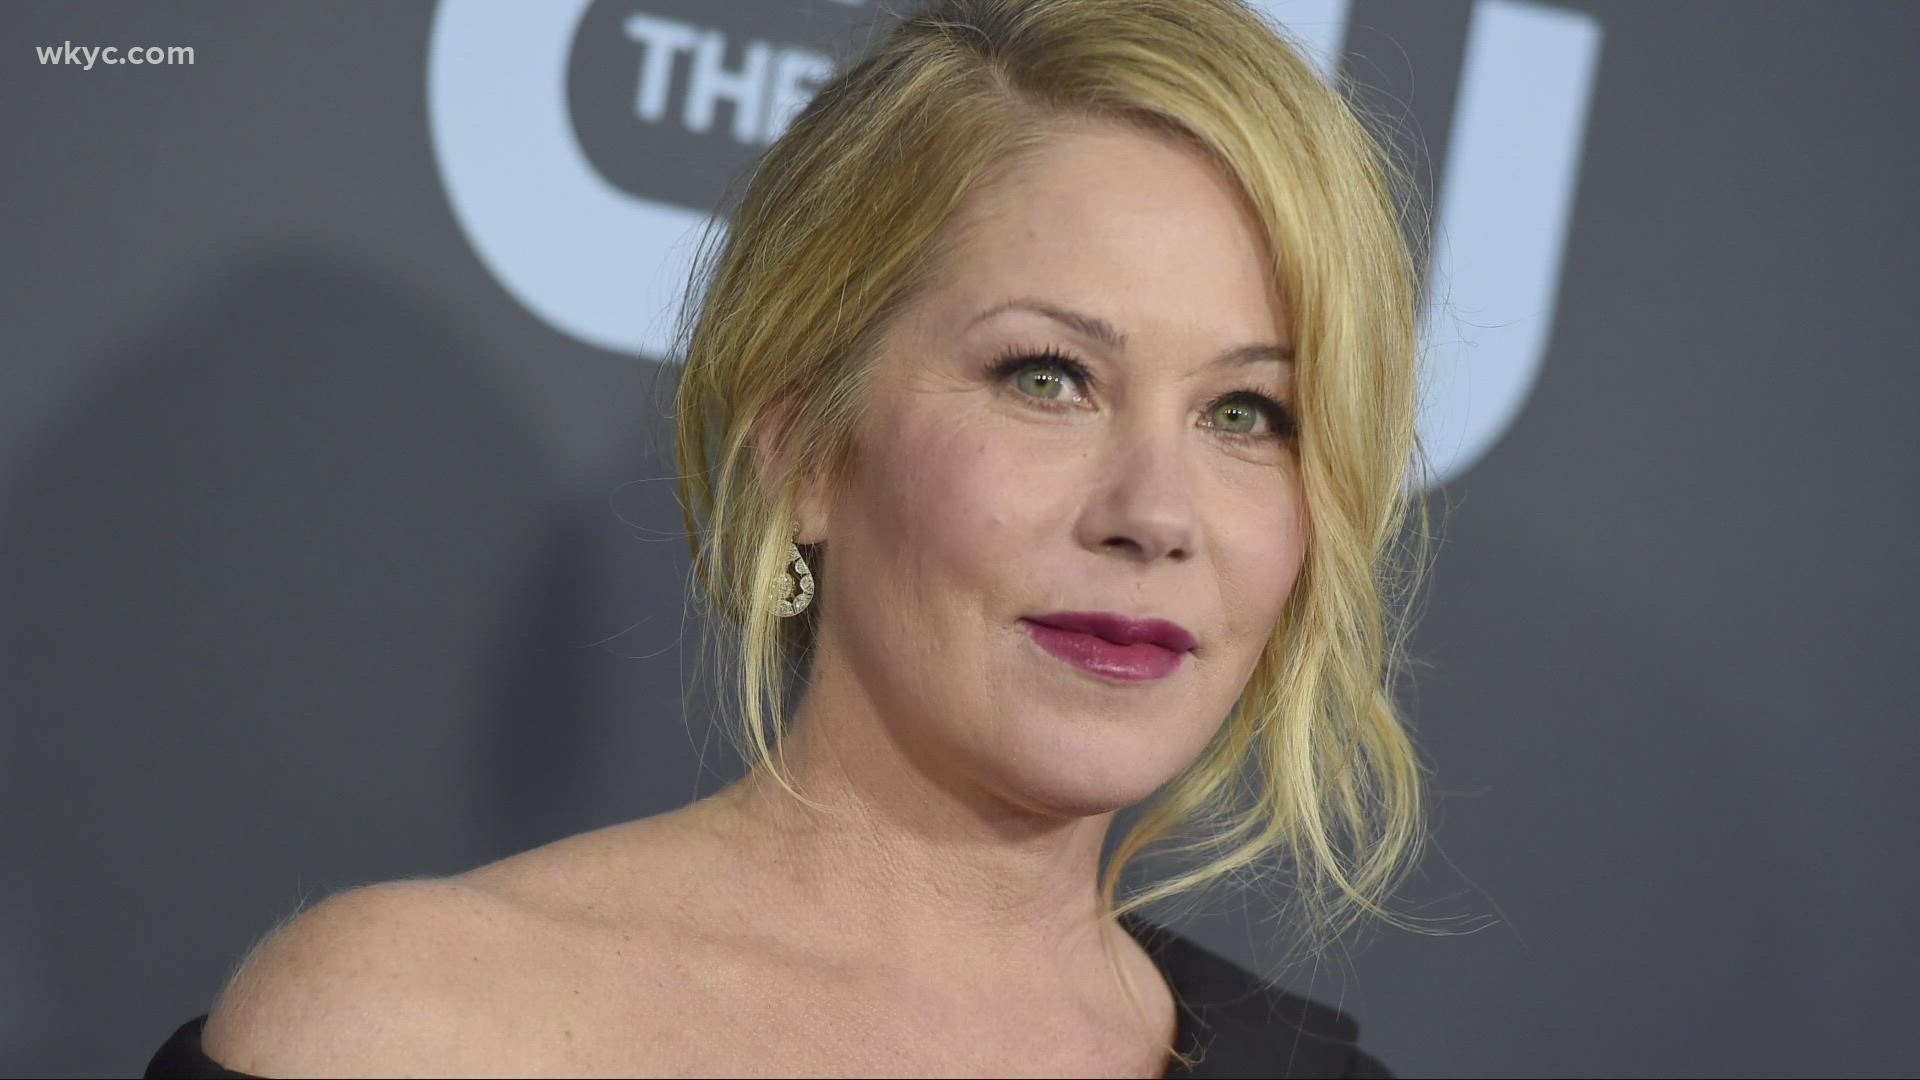 The 49-year-old actress took to twitter to reveal that she was diagnosed with the autoimmune disease a few months ago.